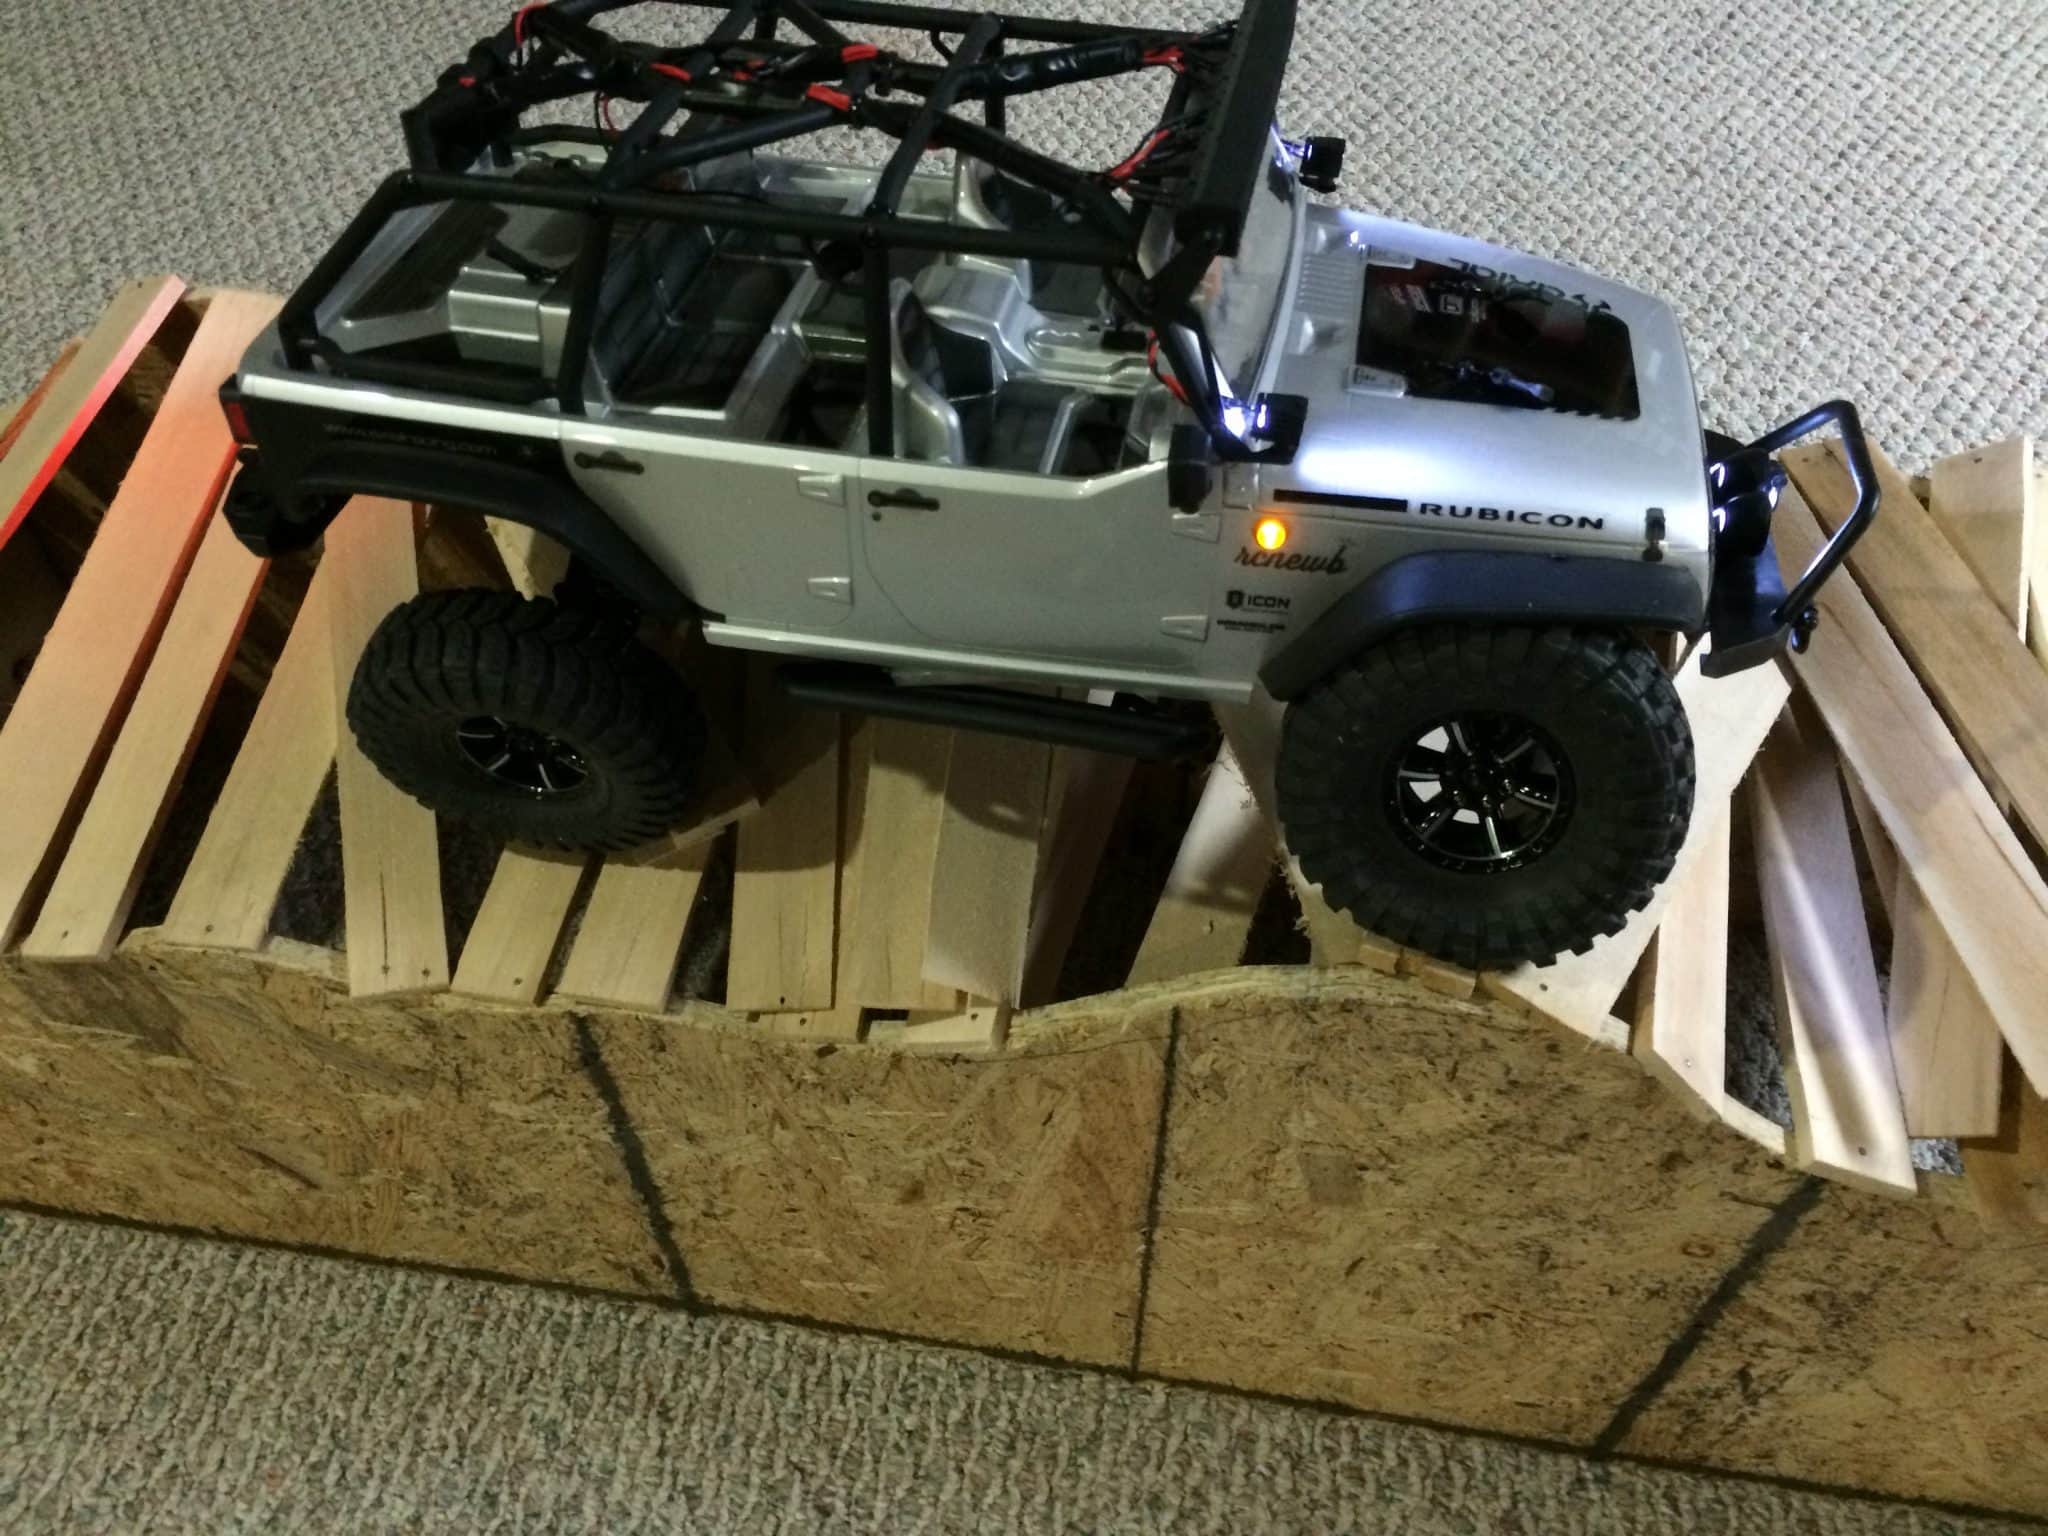 Cheap Entertainment: A DIY Indoor Crawling “Course” | RC Newb